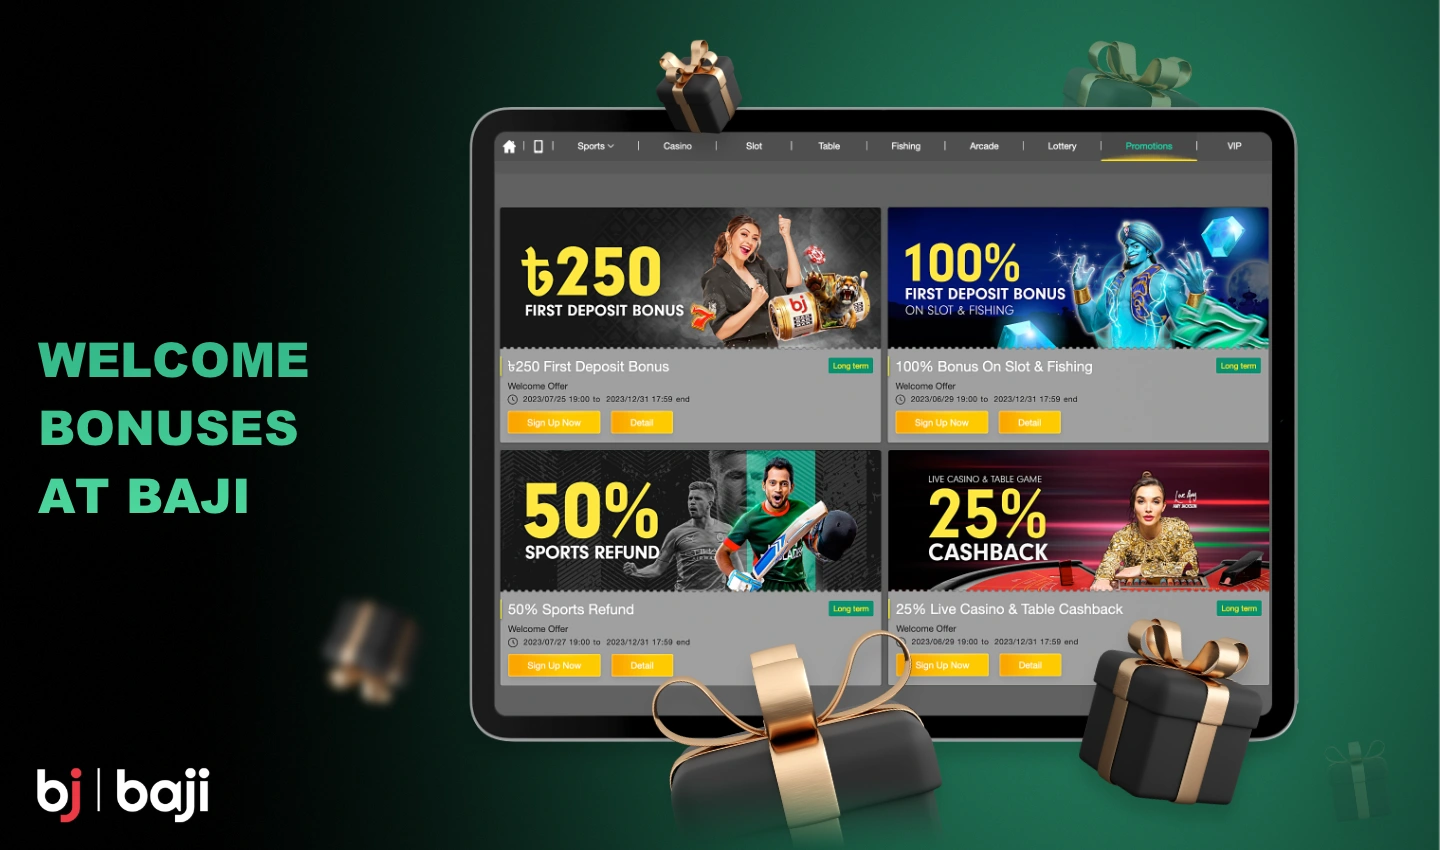 Baji welcome bonuses can be used for both sports betting and casino games